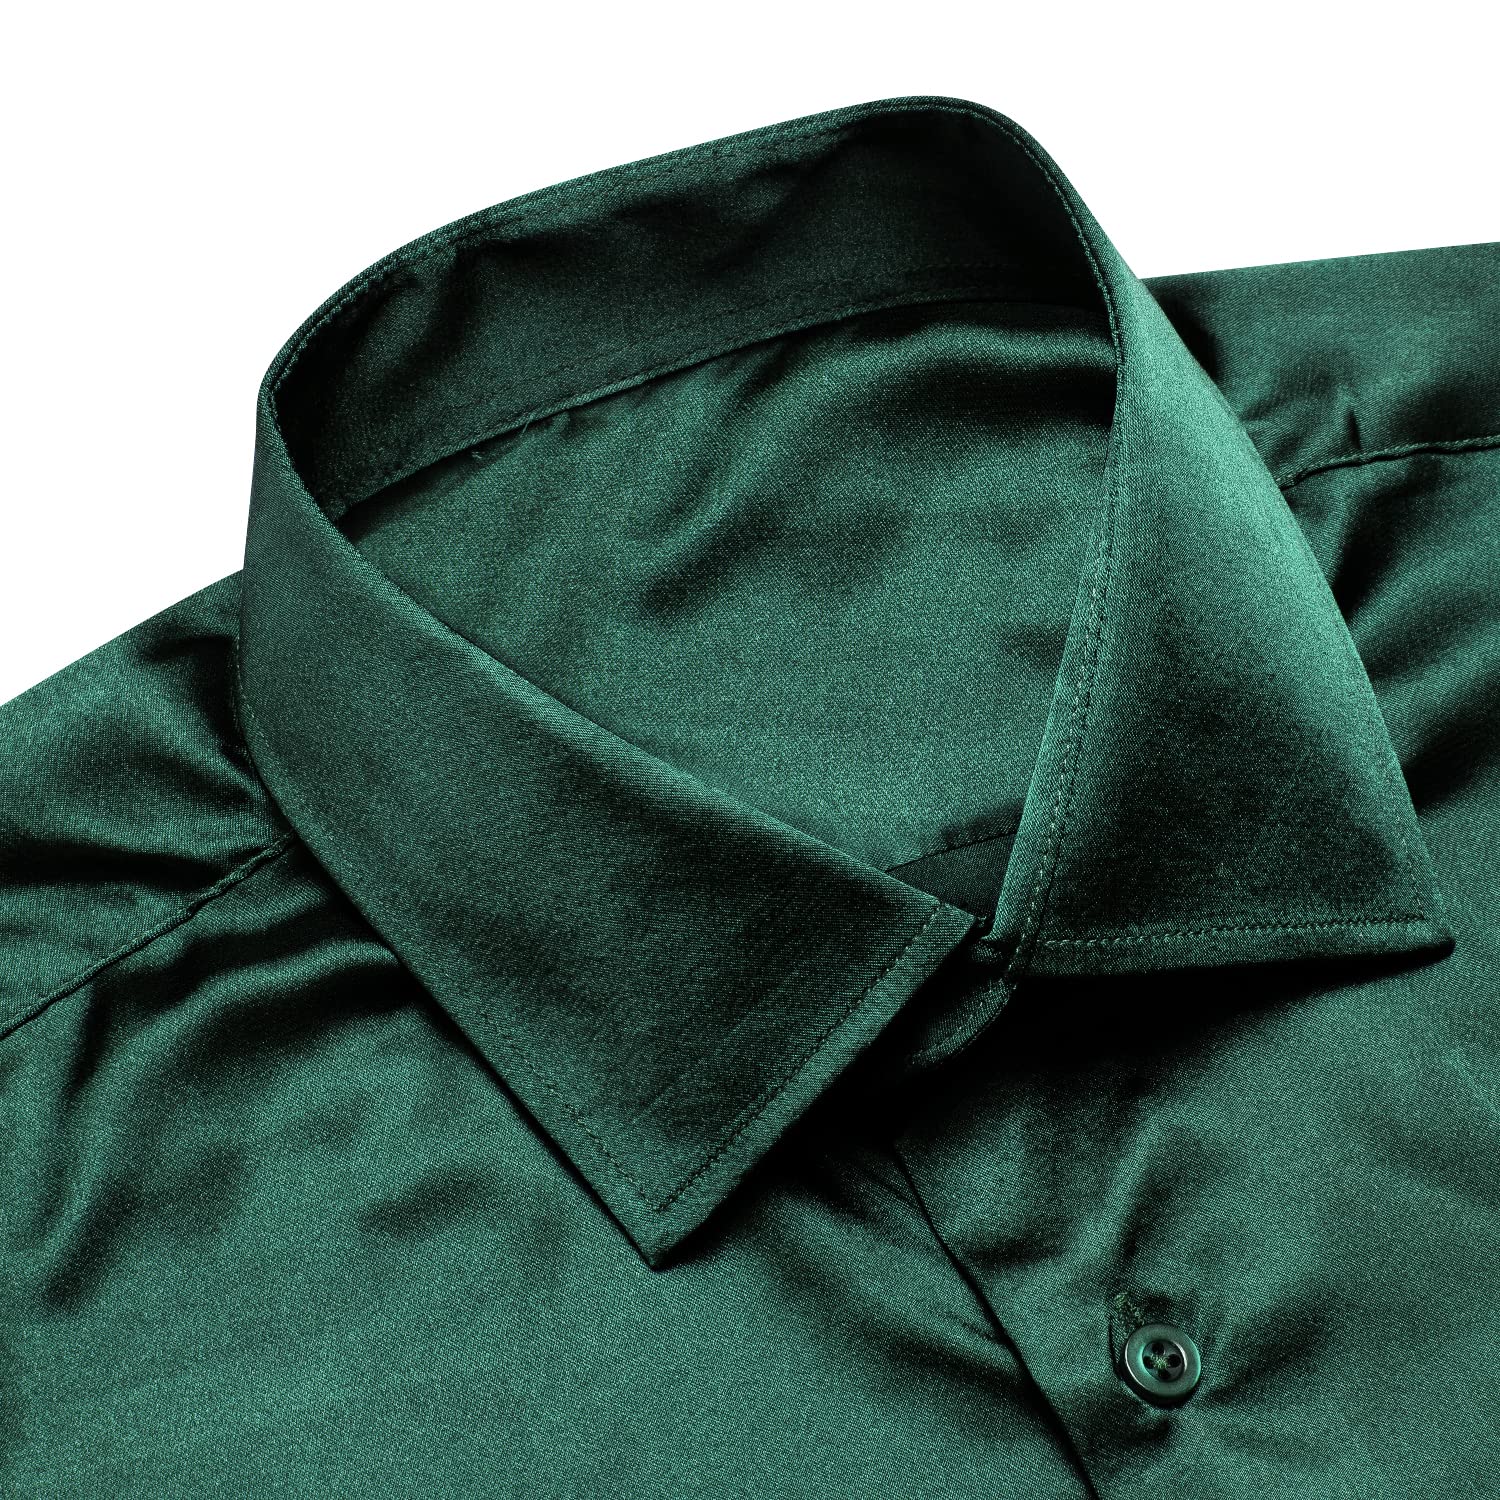 Hi-Tie Stretch Satin Solid Mens Dark Green Dress Shirt Long Sleeve Regular Fit Button Down Shirt for Party Prom Dinner